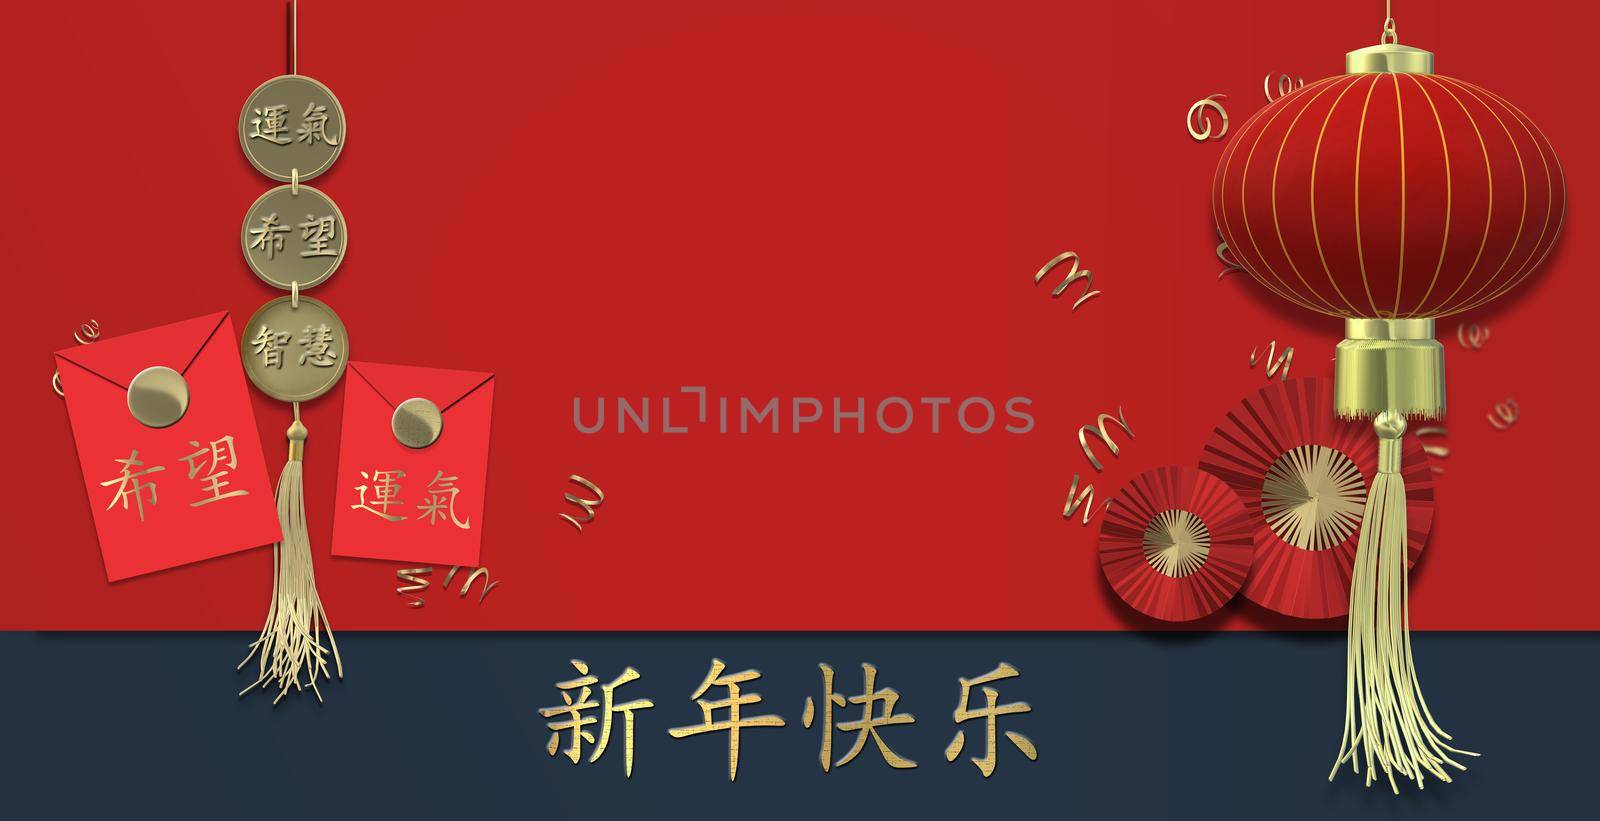 Chinese 2021 New Year banner. Red lanterns, paper fans over red background. Text Chinese translation Happy New Year. 3D rendering